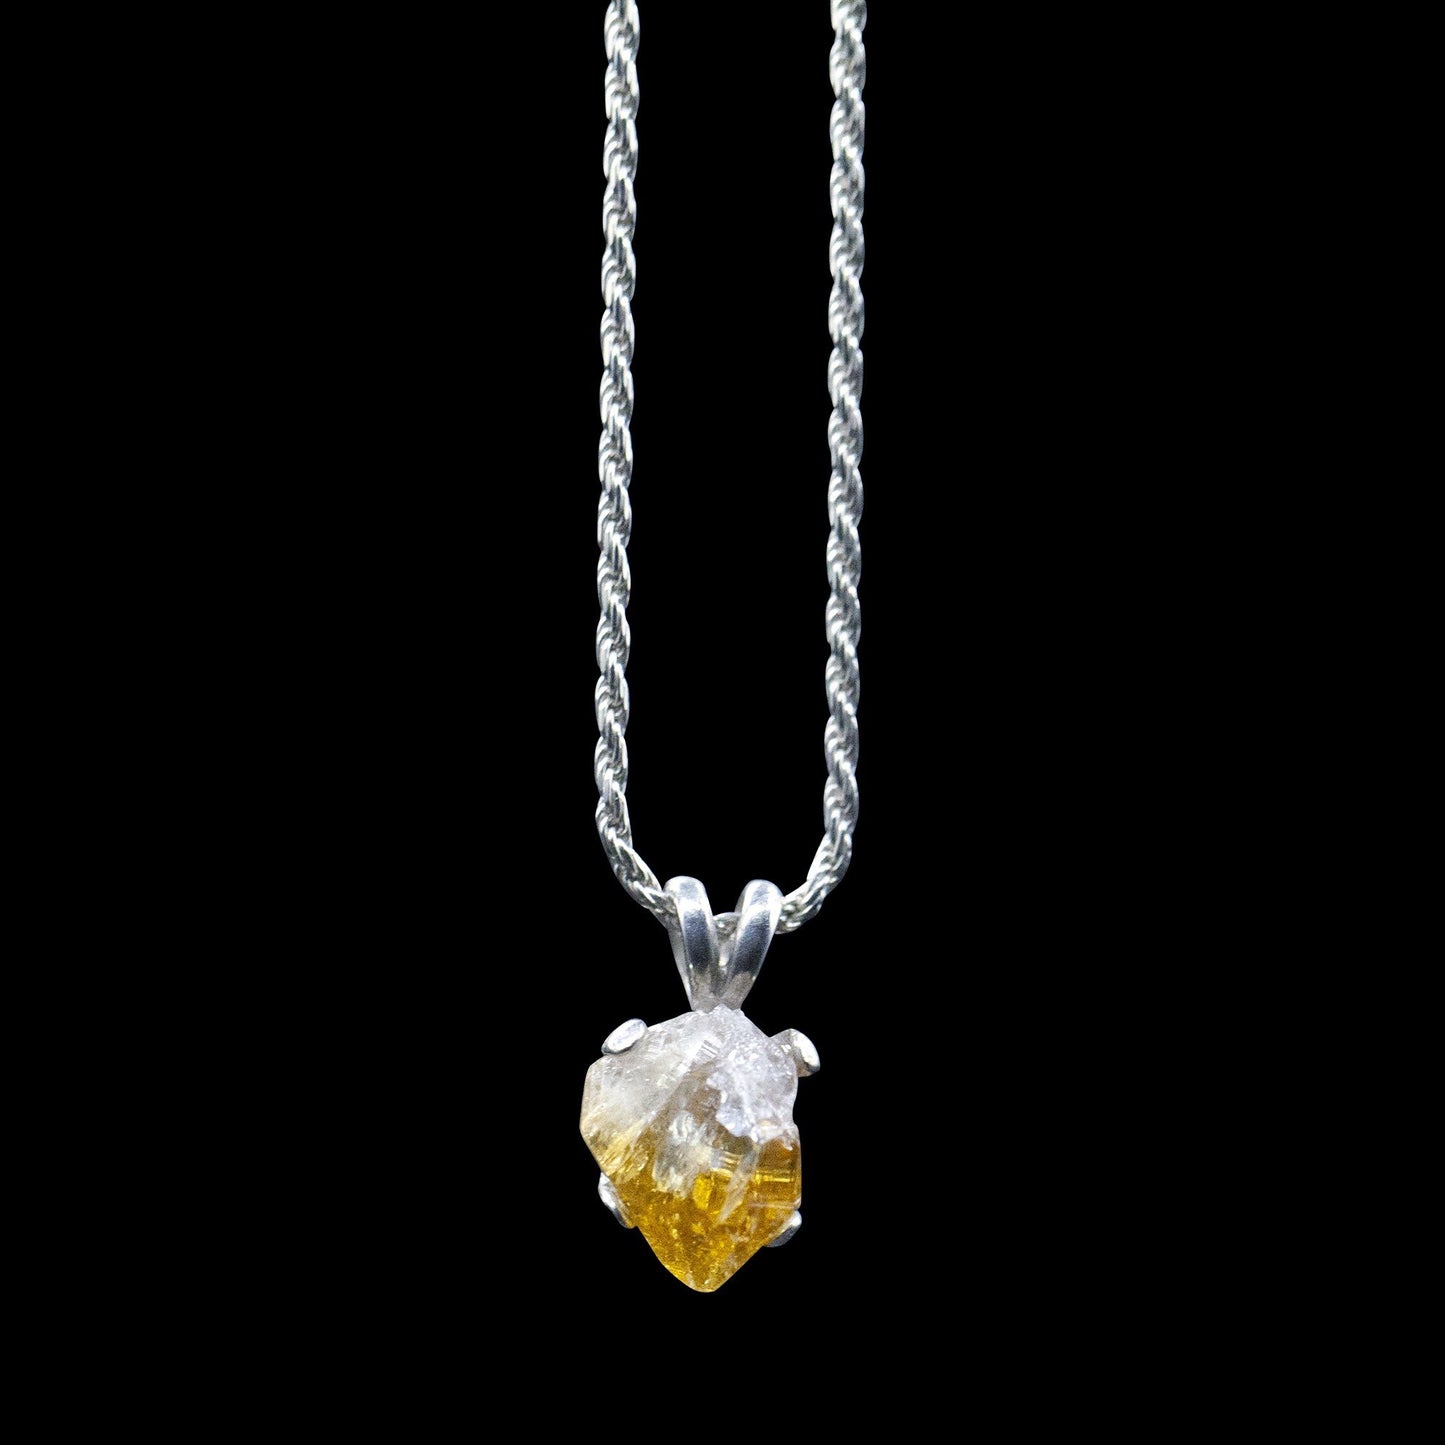 Raw Citrine Solitaire on Sterling Silver Rope